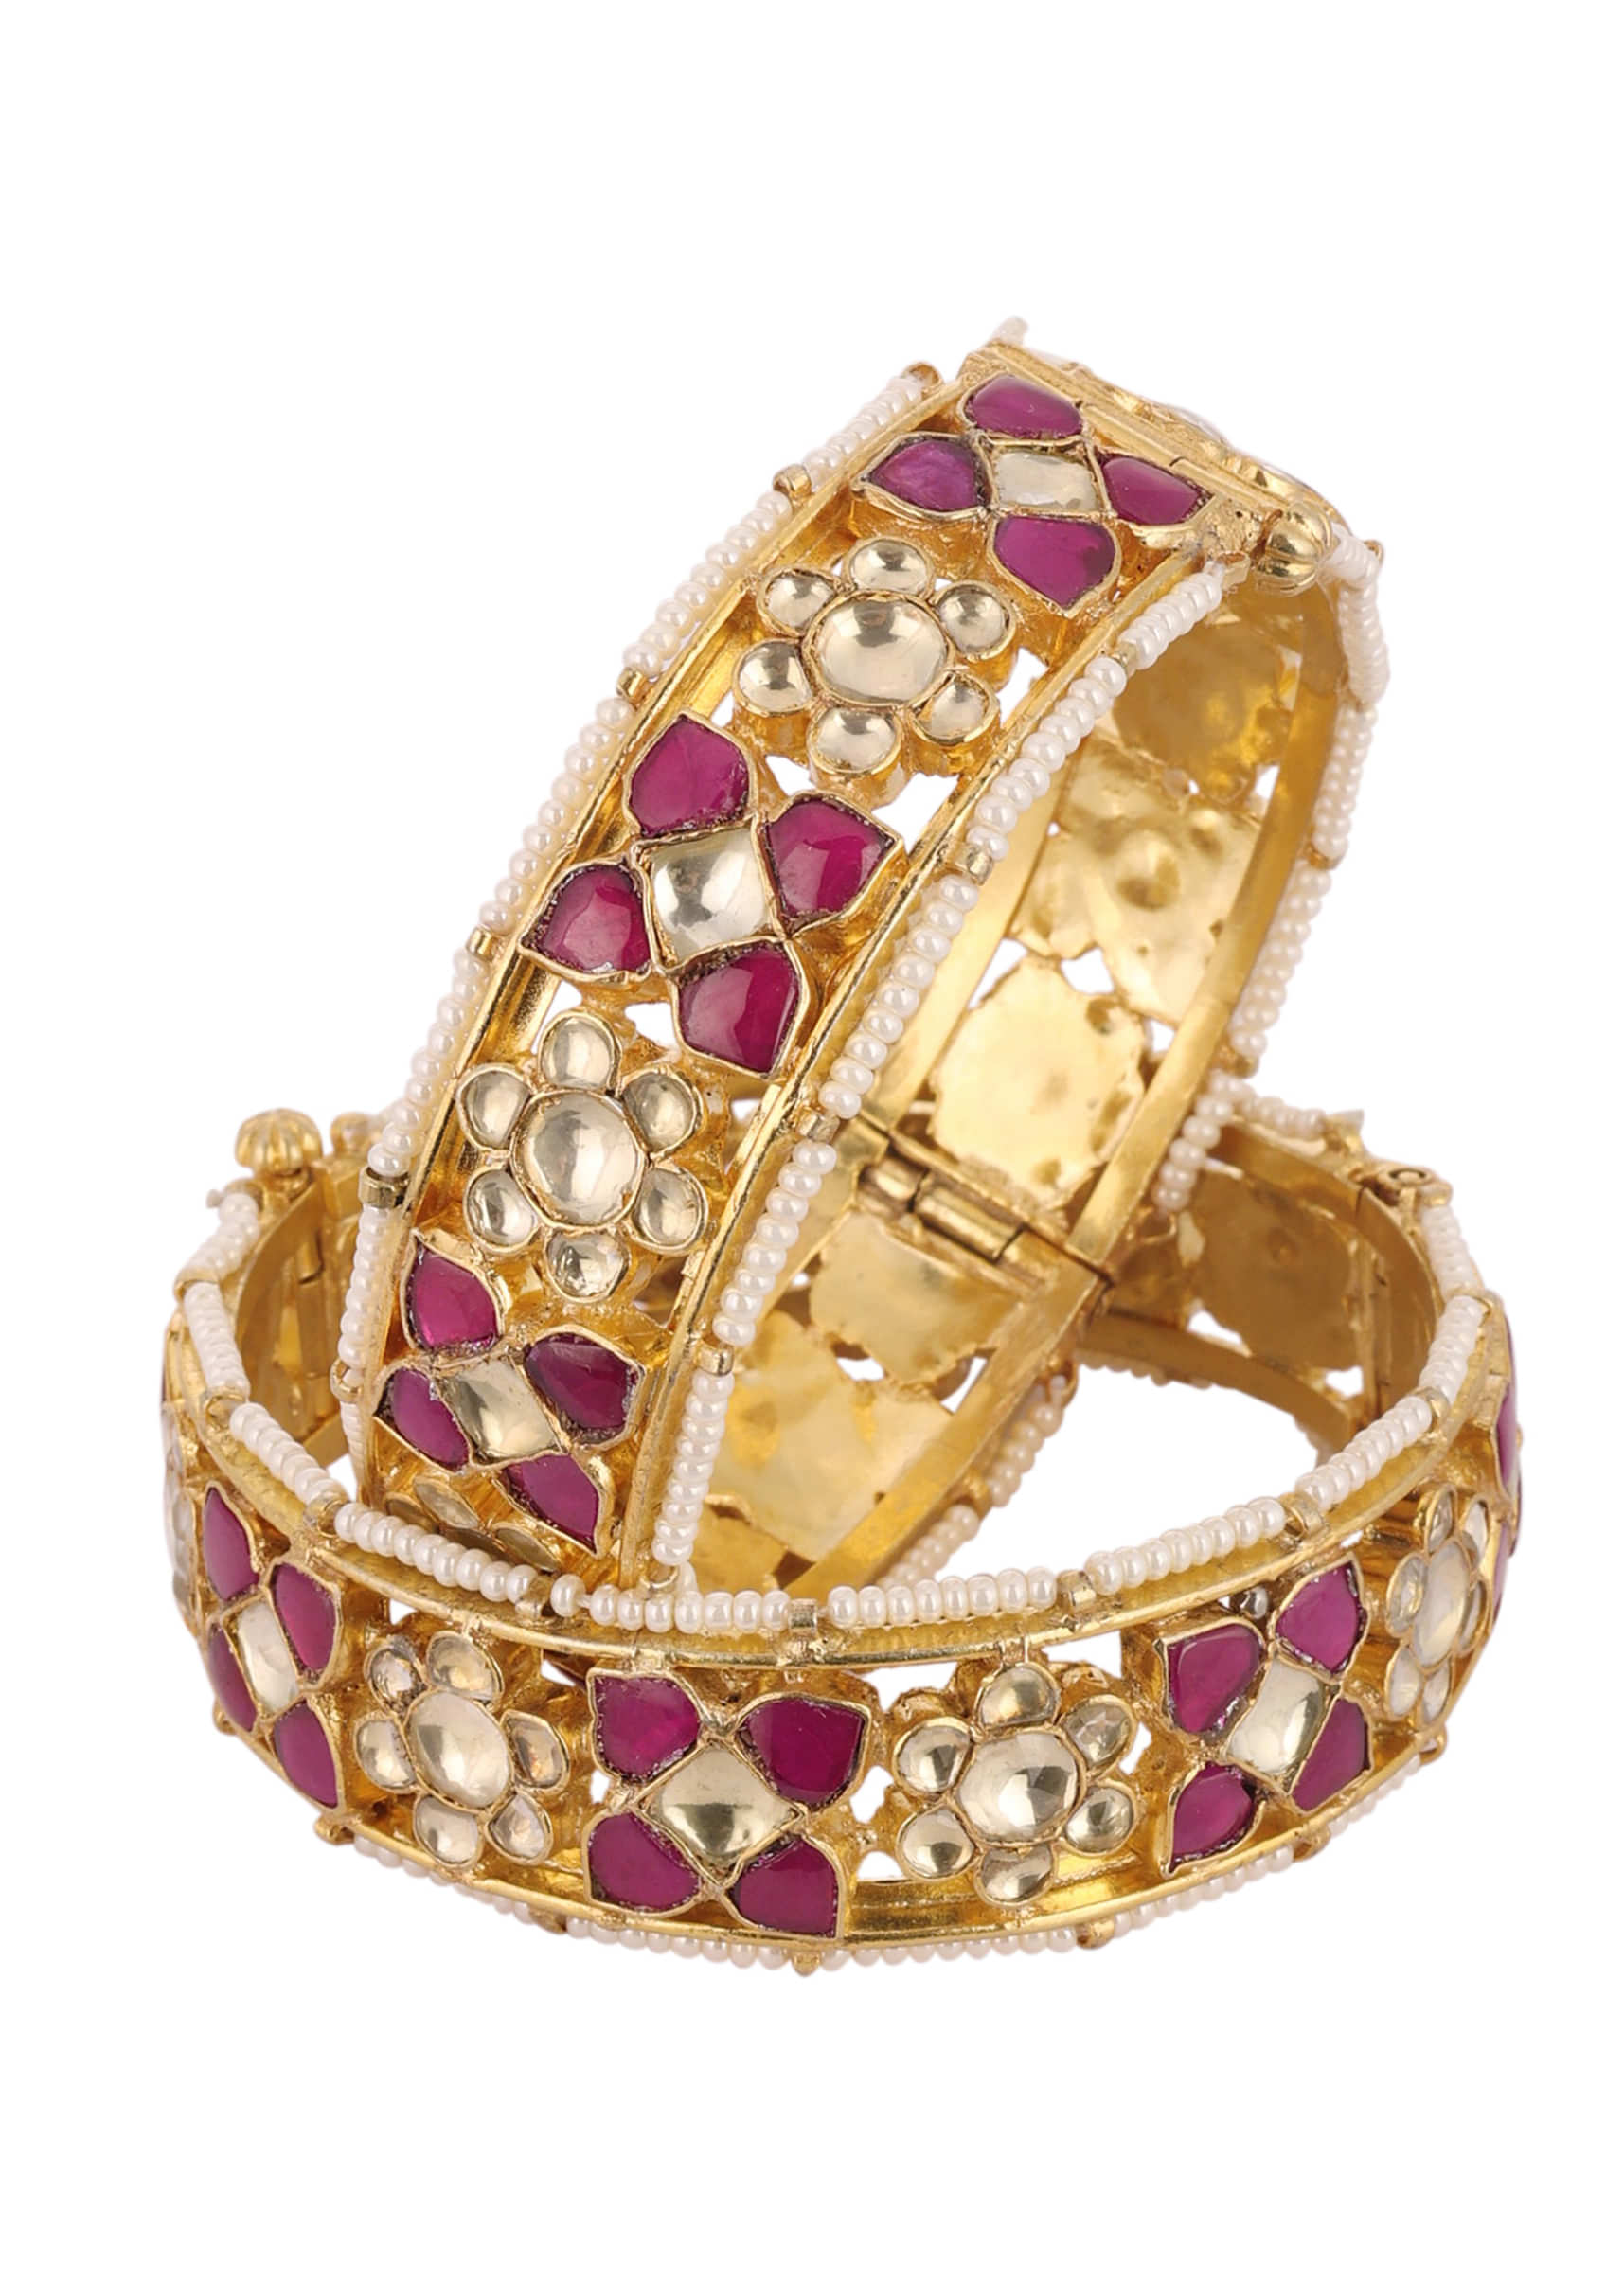 Gold Fineshed Kundan Polki Bangles In Ruby Red And WhiteTone